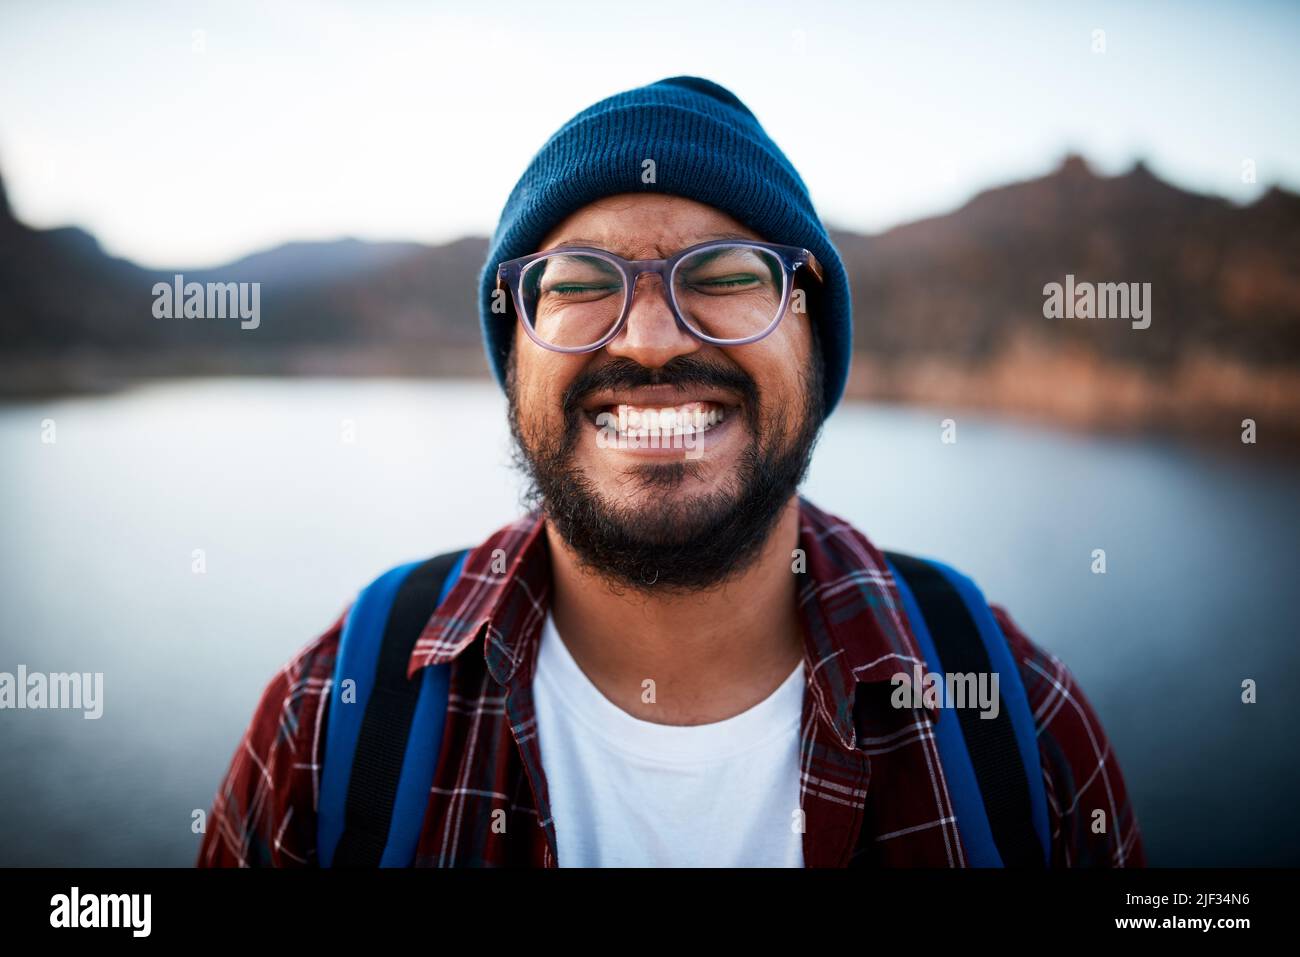 An attractive man pulls a silly grin on a hiking trip by a lake Stock Photo